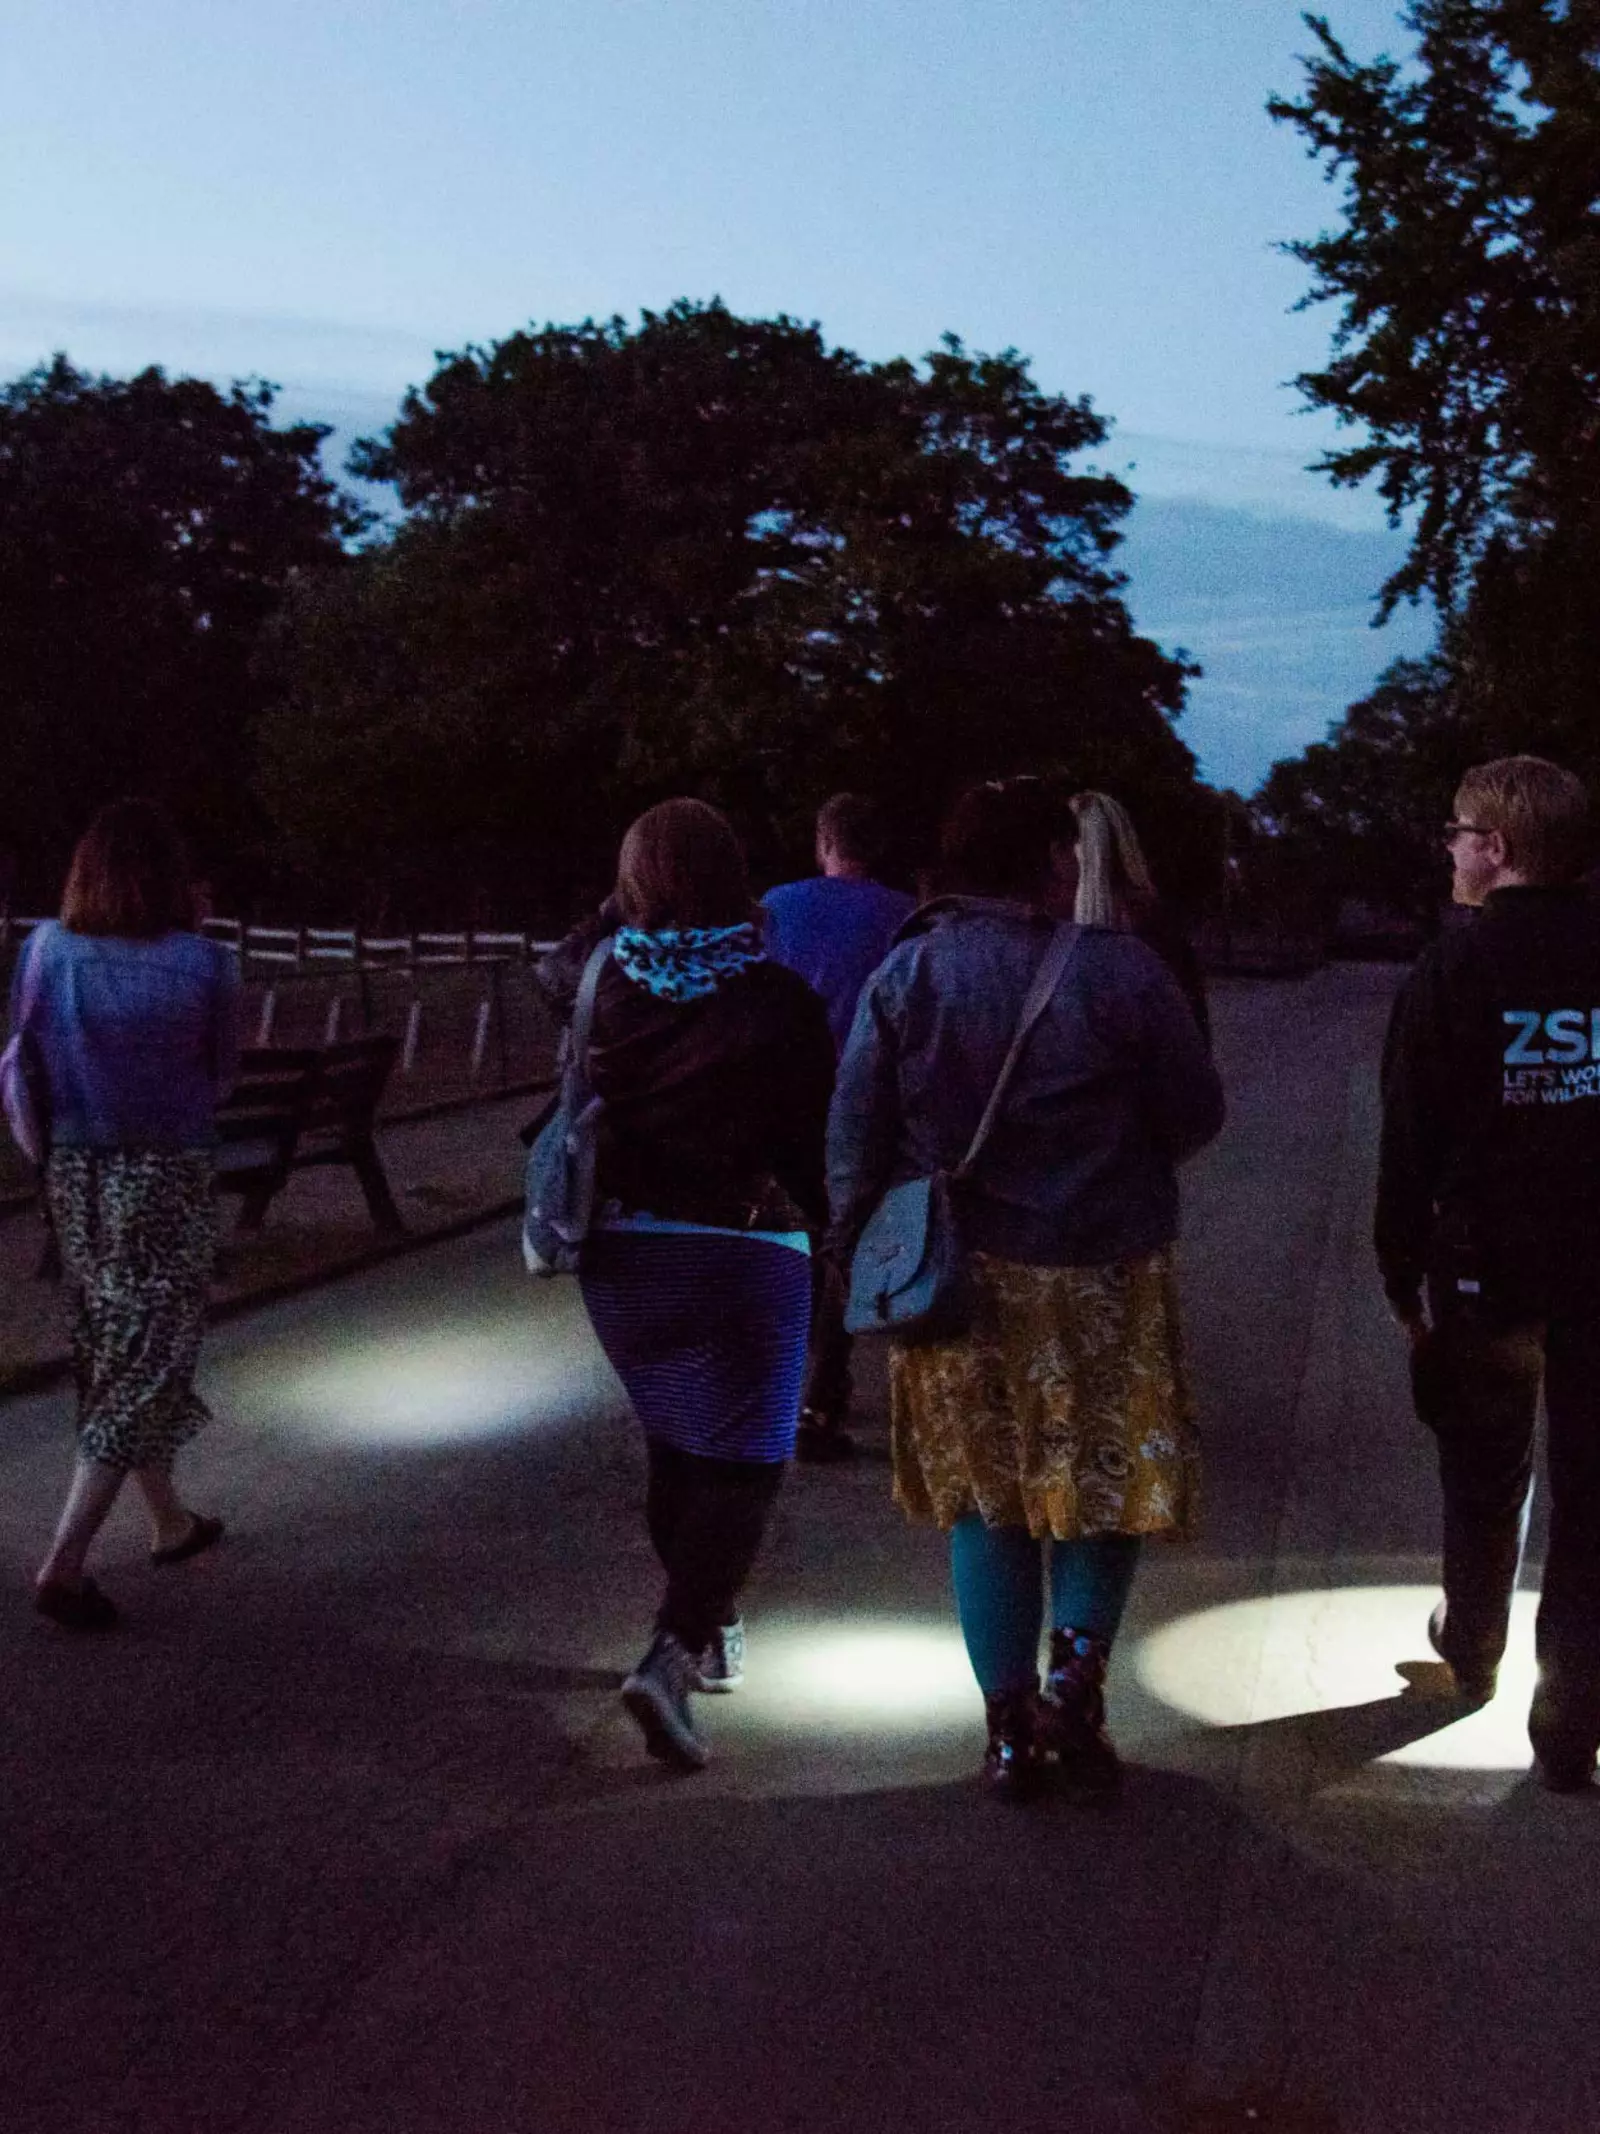 Torchlight walk at Lookout Lodge experience Whipsnade Zoo